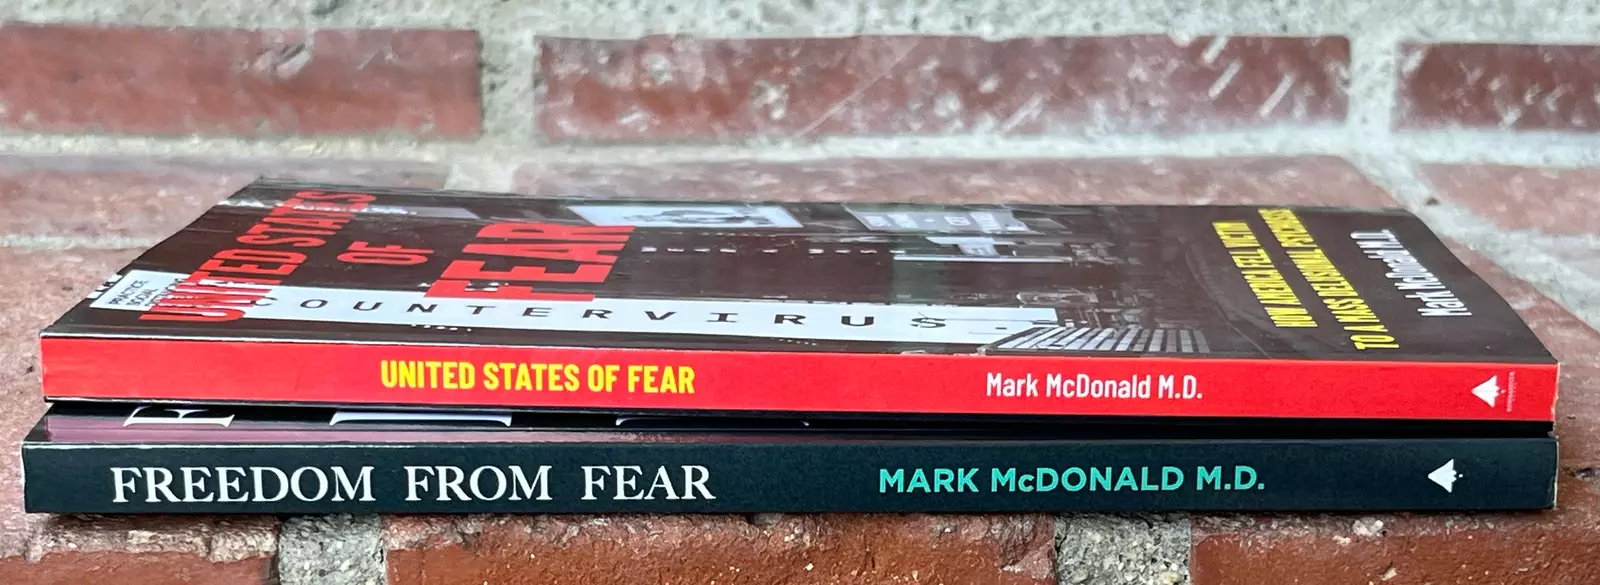 Spines of two books by Dr. Mark McDonald